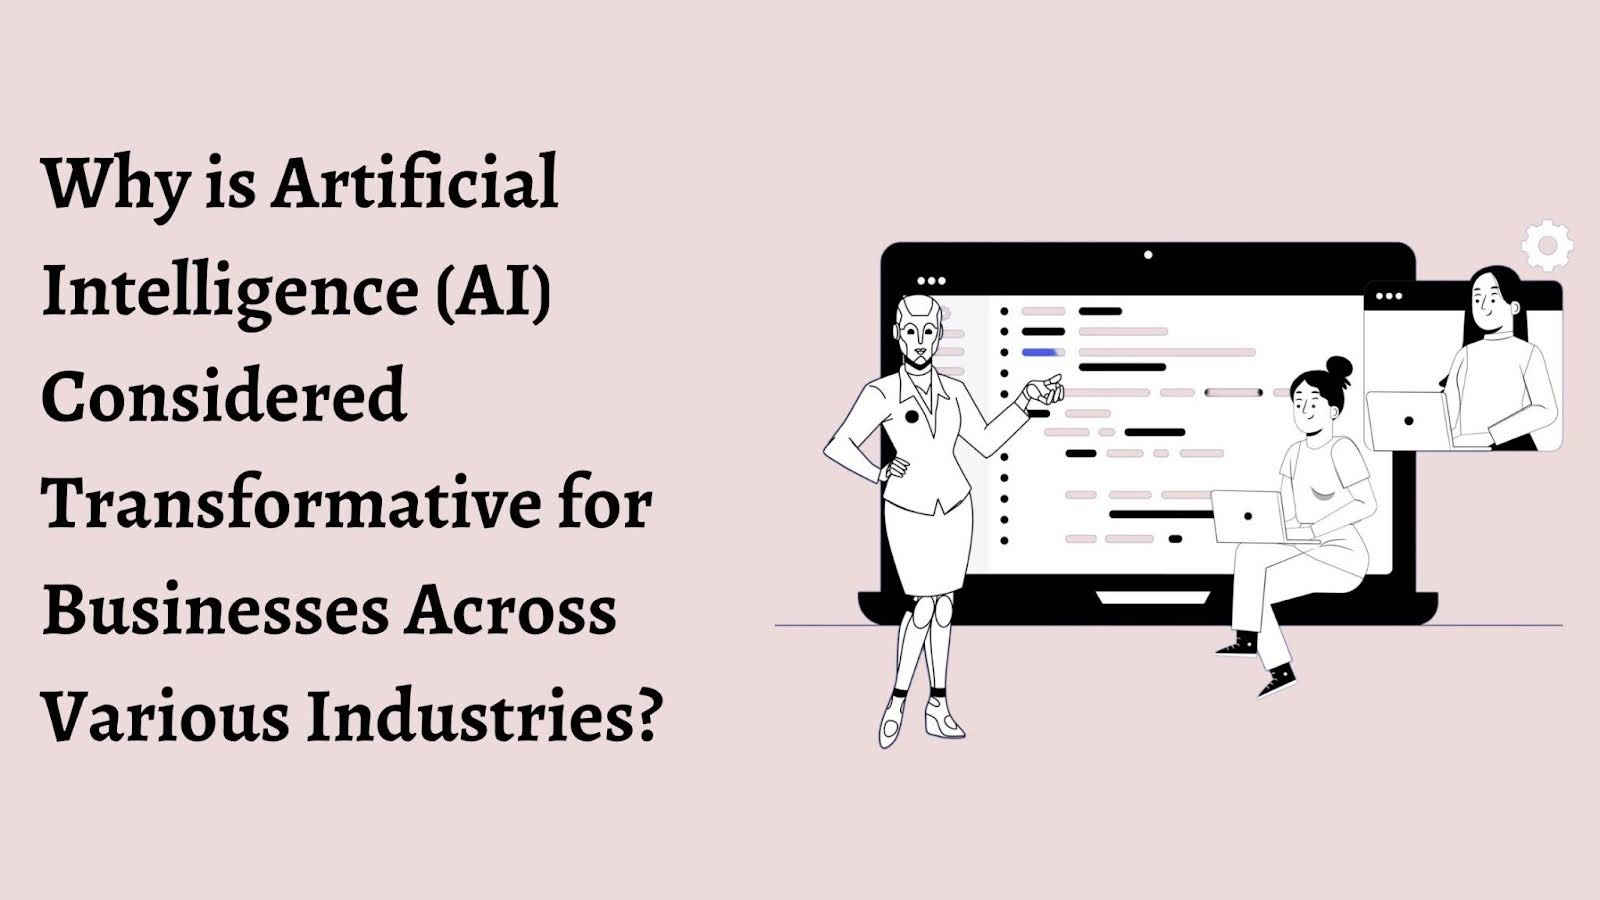 Why is artificial intelligence (AI) considered transformative for businesses across various industries?